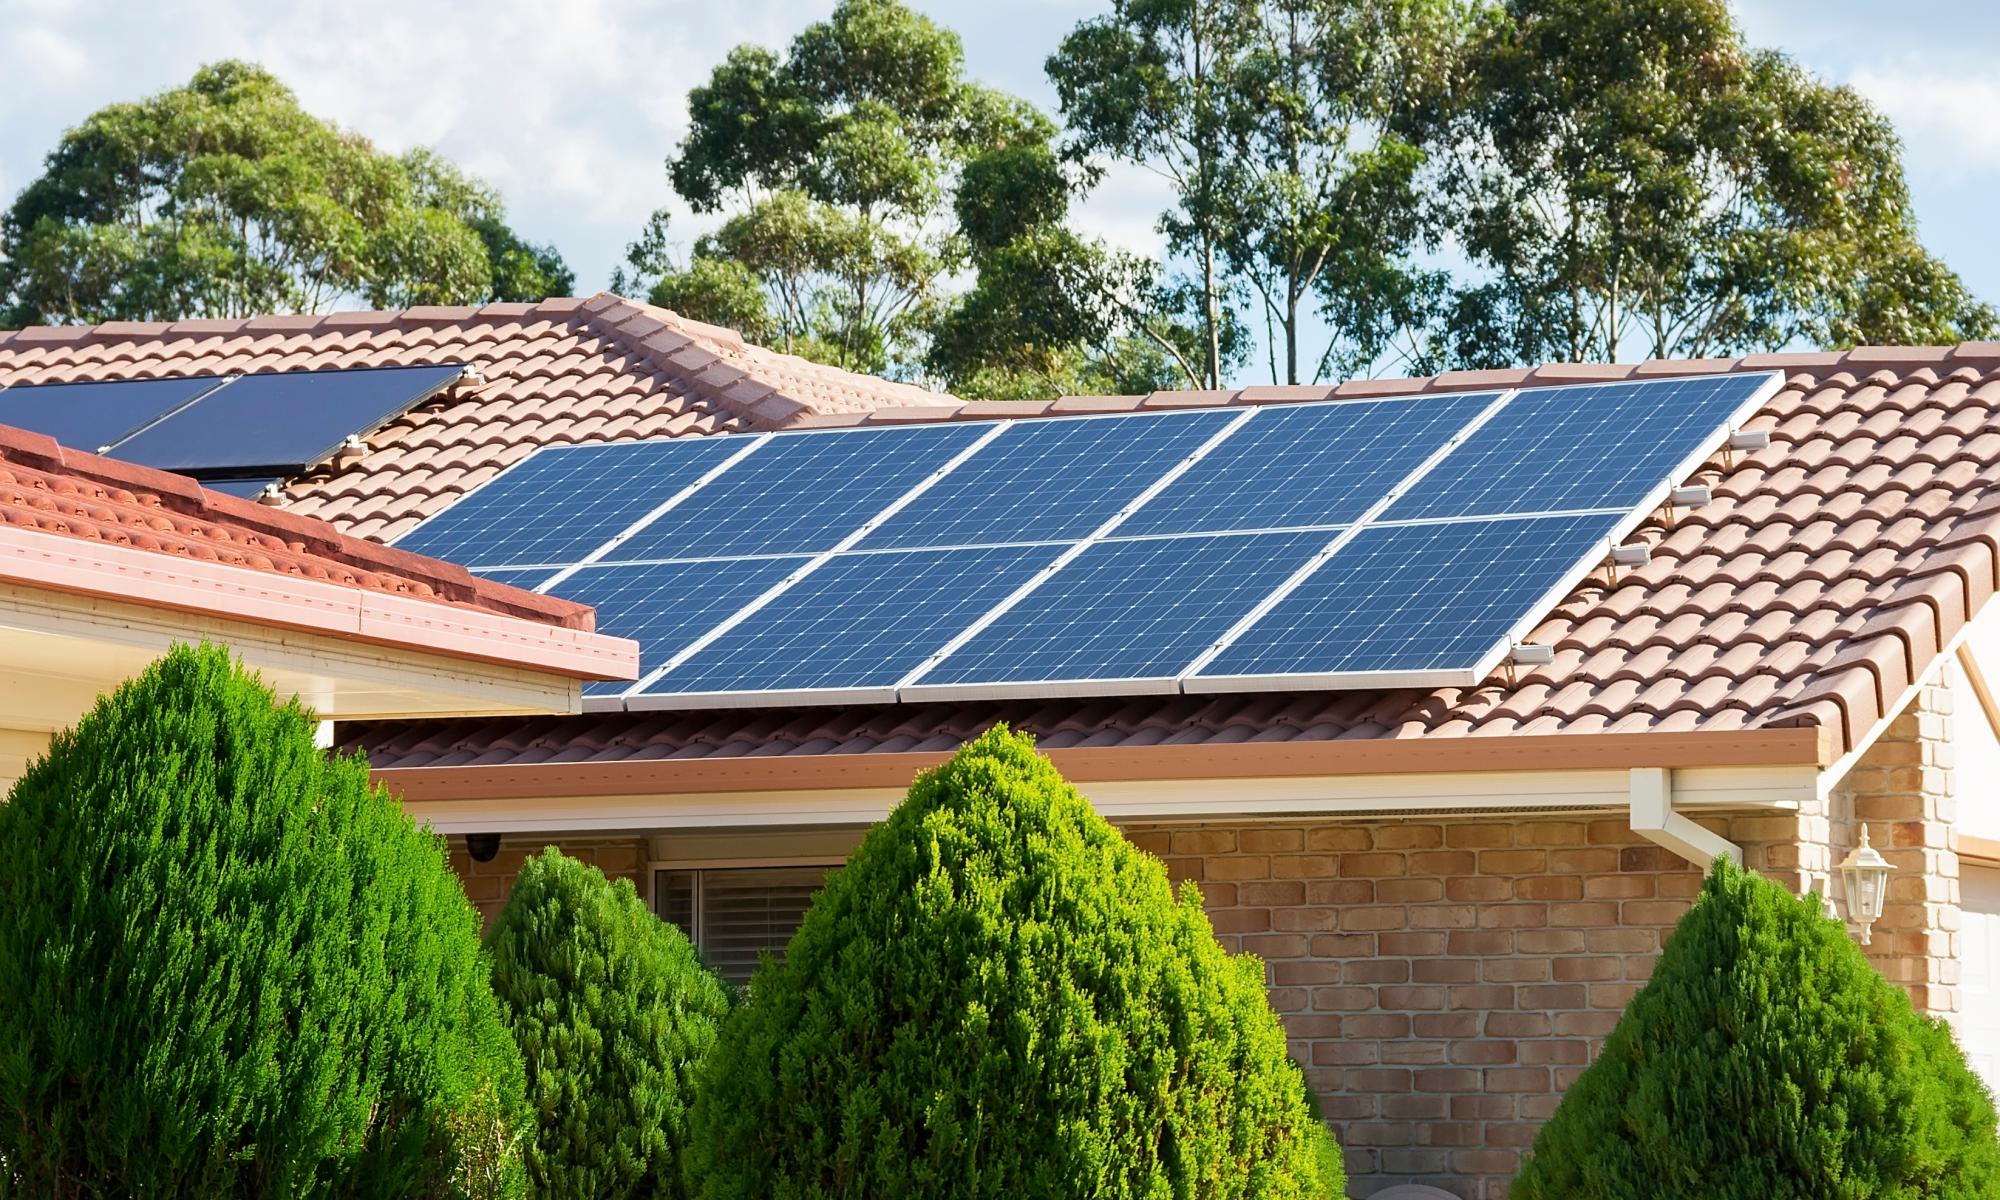 Tougher seven-star energy efficiency standards for new Australian homes set to be approved